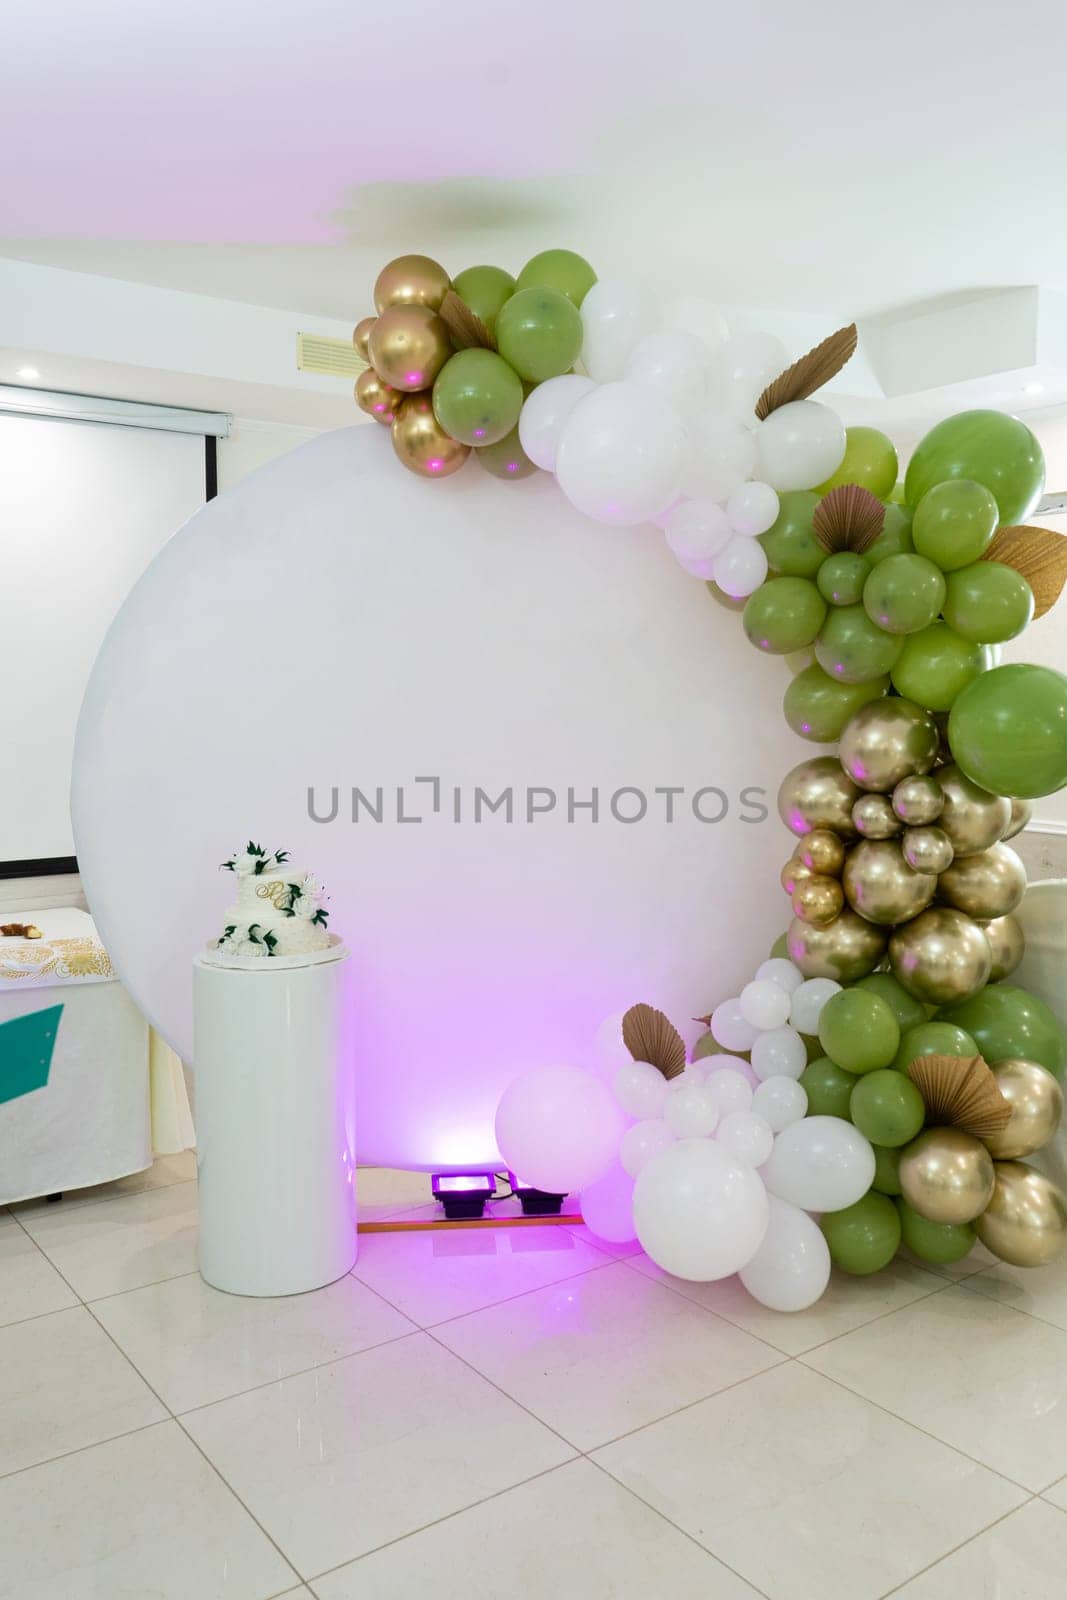 The white photo zone is decorated with balloons.